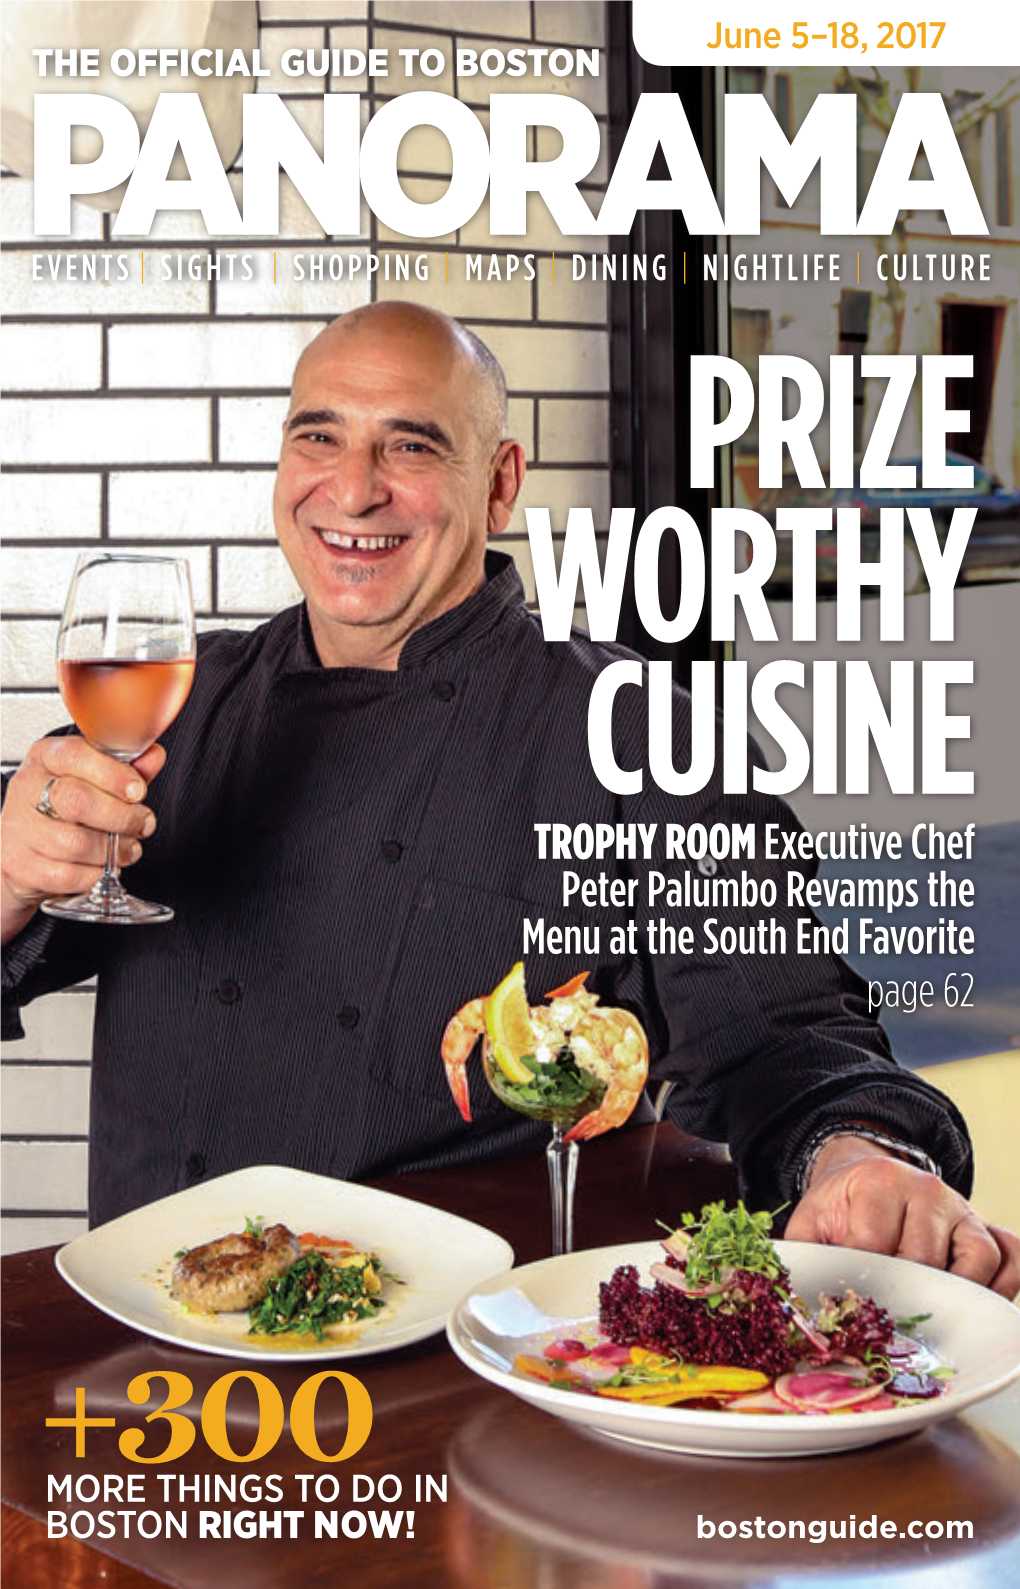 TROPHY ROOM Executive Chef Peter Palumbo Revamps the Menu at the South End Favorite Page 62